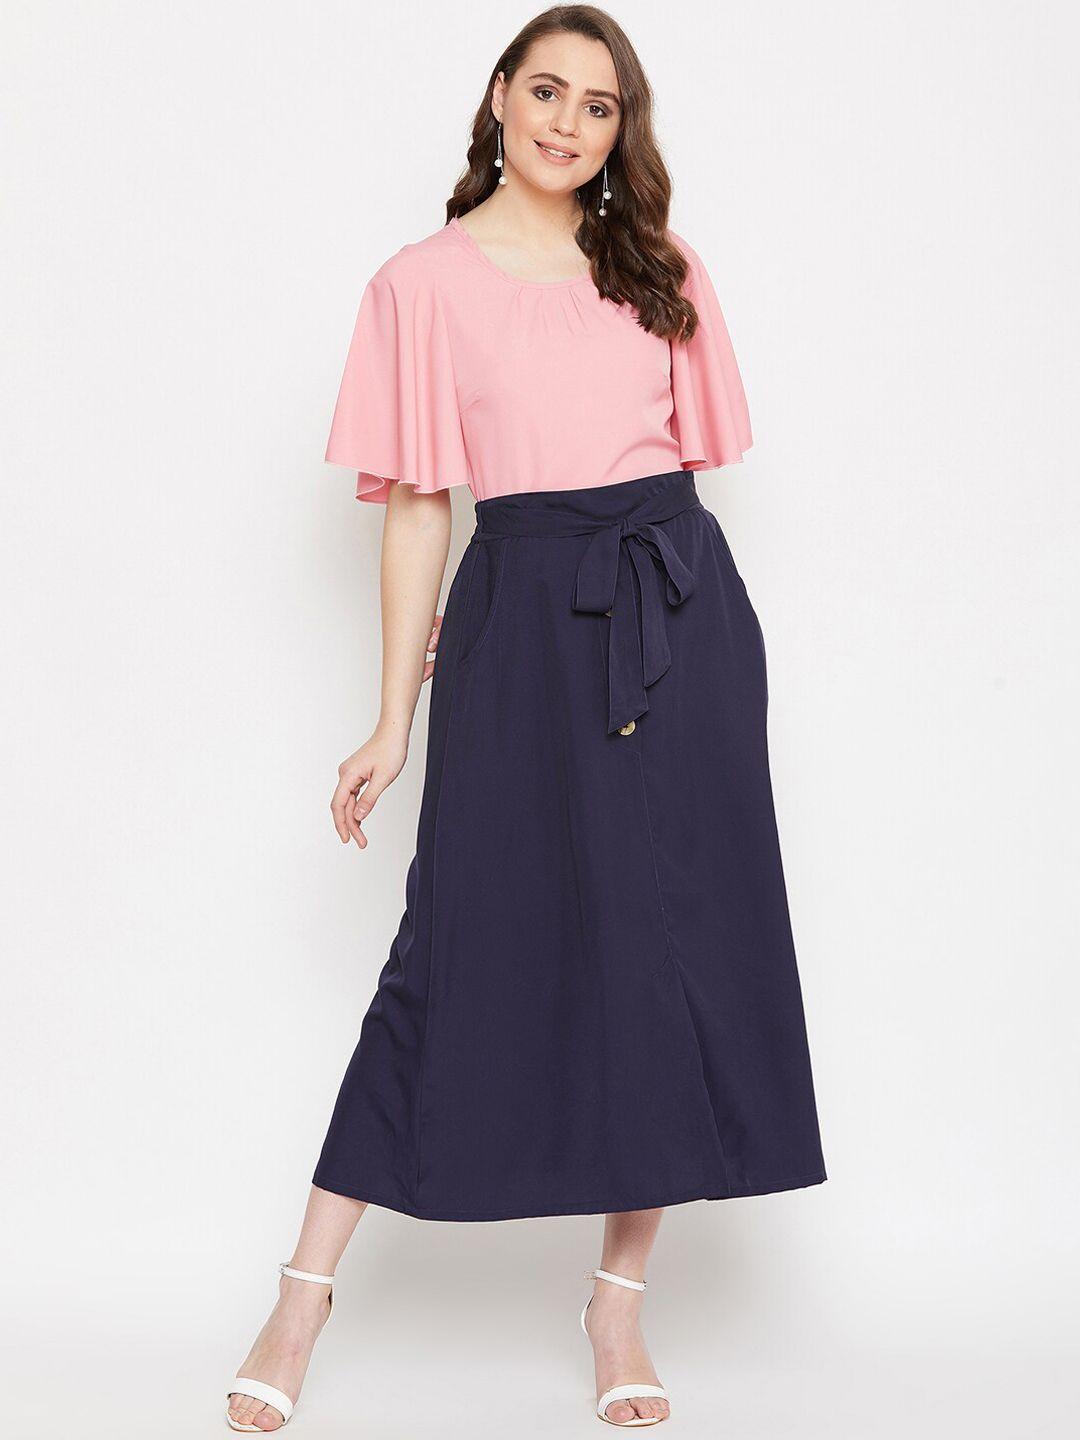 bitterlime women pink & navy blue solid top with skirt